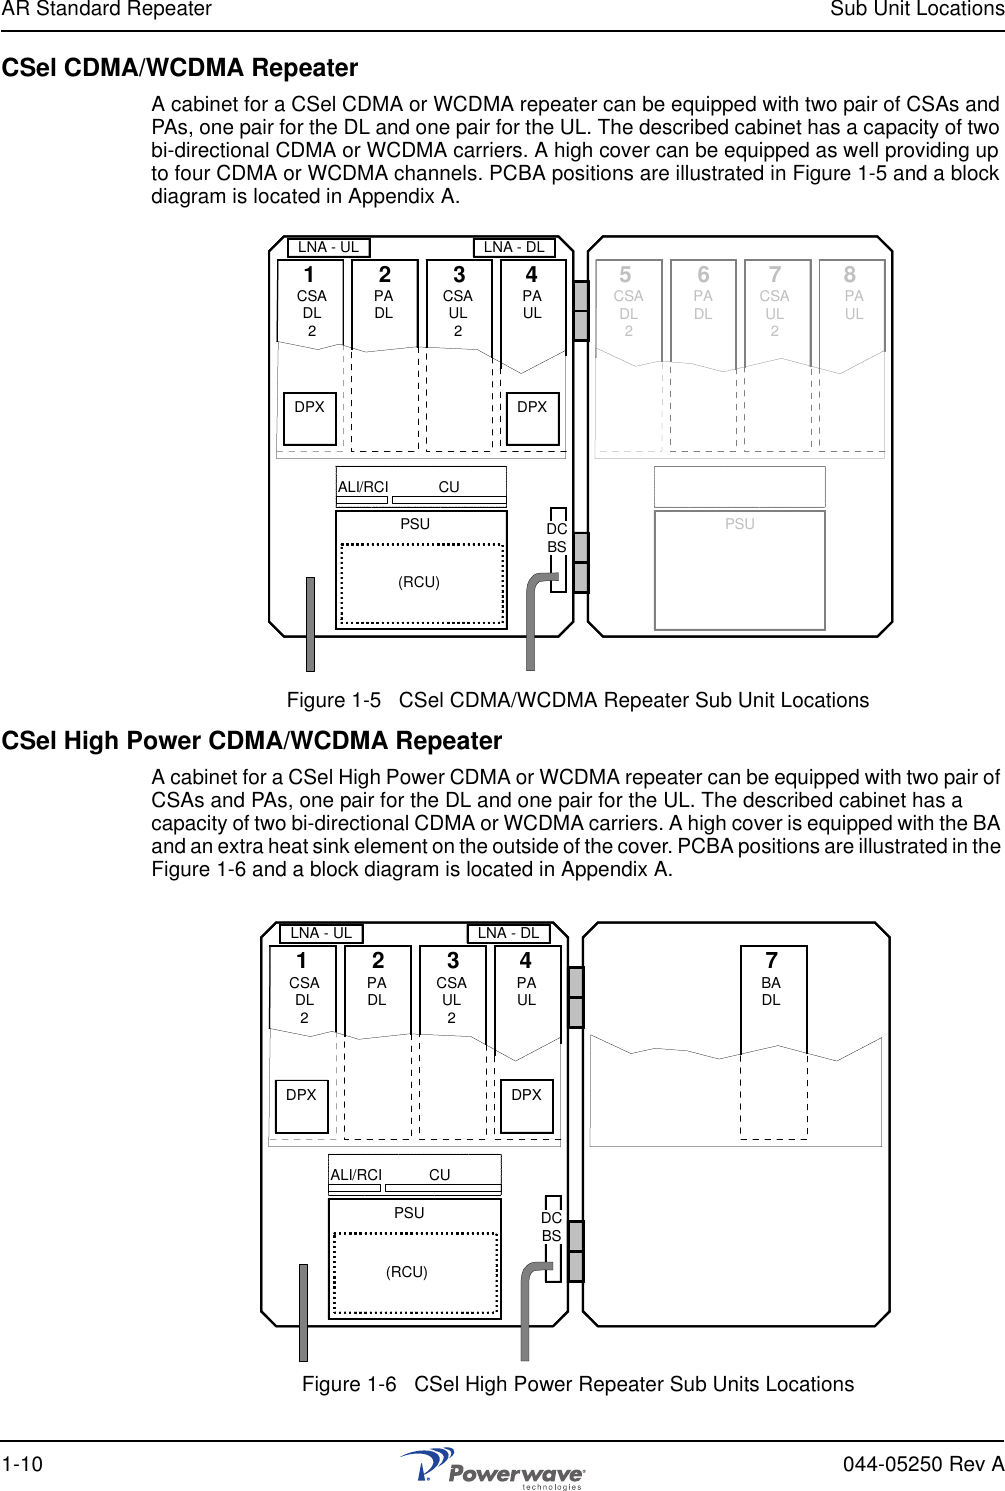 AR Standard Repeater Sub Unit Locations1-10 044-05250 Rev ACSel CDMA/WCDMA RepeaterA cabinet for a CSel CDMA or WCDMA repeater can be equipped with two pair of CSAs and PAs, one pair for the DL and one pair for the UL. The described cabinet has a capacity of two bi-directional CDMA or WCDMA carriers. A high cover can be equipped as well providing up to four CDMA or WCDMA channels. PCBA positions are illustrated in Figure 1-5 and a block diagram is located in Appendix A.Figure 1-5   CSel CDMA/WCDMA Repeater Sub Unit LocationsCSel High Power CDMA/WCDMA RepeaterA cabinet for a CSel High Power CDMA or WCDMA repeater can be equipped with two pair of CSAs and PAs, one pair for the DL and one pair for the UL. The described cabinet has a capacity of two bi-directional CDMA or WCDMA carriers. A high cover is equipped with the BA and an extra heat sink element on the outside of the cover. PCBA positions are illustrated in the Figure 1-6 and a block diagram is located in Appendix A.Figure 1-6   CSel High Power Repeater Sub Units LocationsLNA - DL1234LNA - ULPSU(RCU)DPXCUALI/RCIDCBSDPXCSADL2PADL CSAUL2PAUL5678CSADL2PADL CSAUL2PAULPSULNA - DL1234LNA - ULPSU(RCU)CUALI/RCIDCBSDPXCSADL2PADL CSAUL2PAUL7BADLDPX